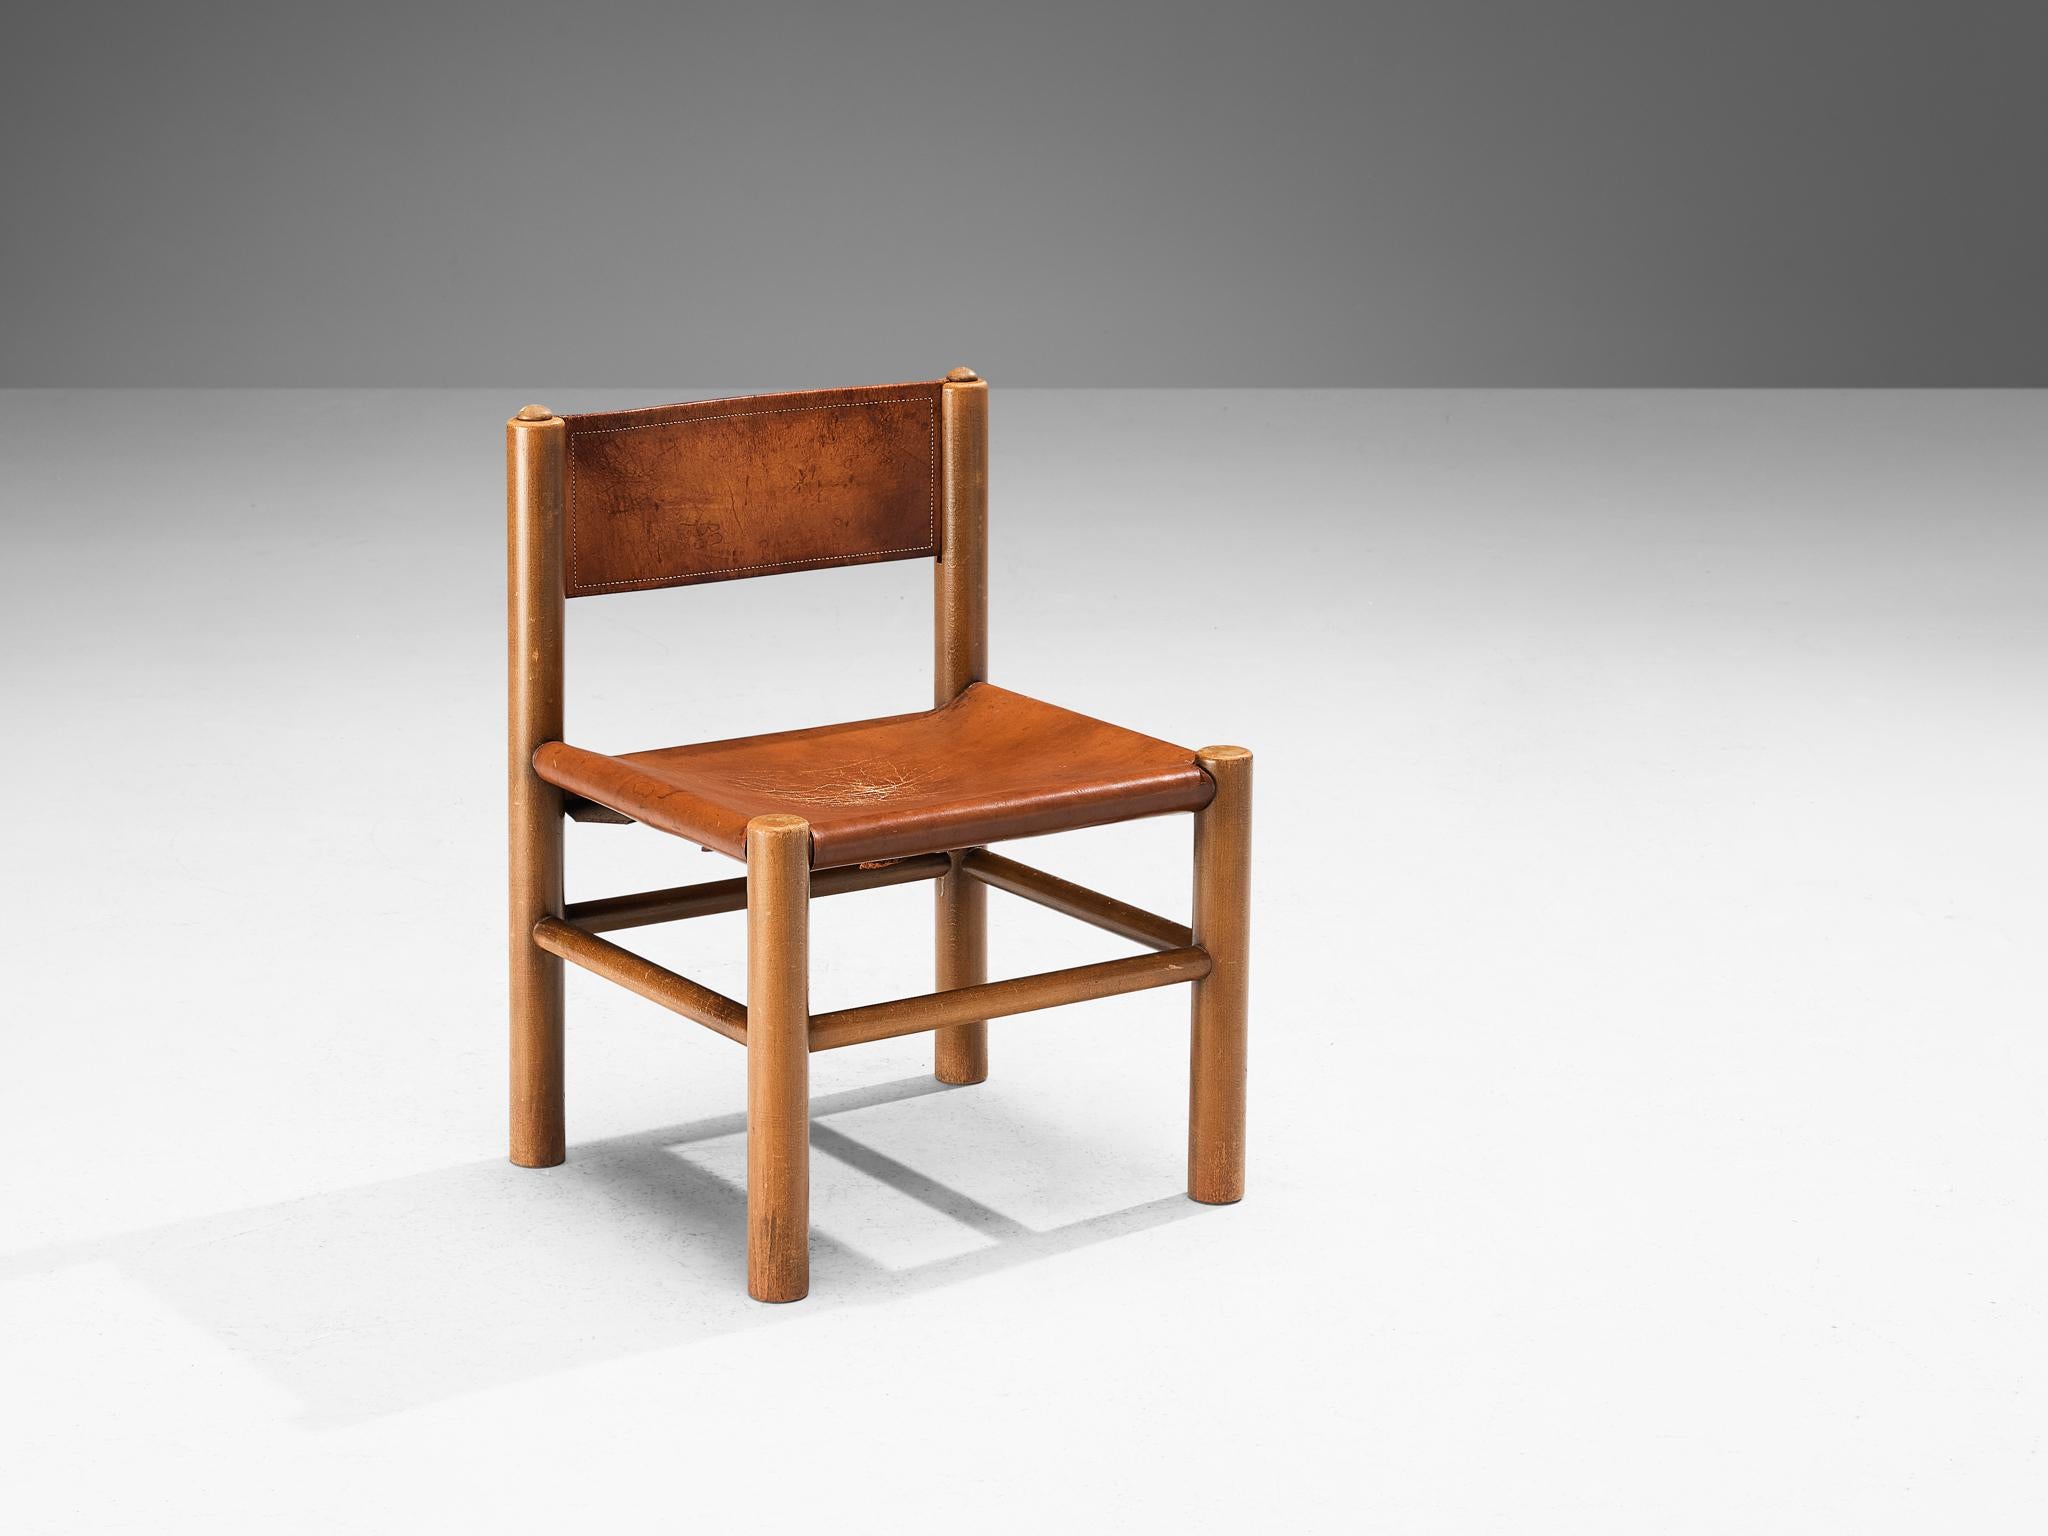 Side chair, stained beech, leather, Spain, 1960s

This strong and sturdy low chair is made in Spain. The thick brown leather forms the seat and backrest, providing an ergonomic quality. The wooden construction is comprised of cylindric slats